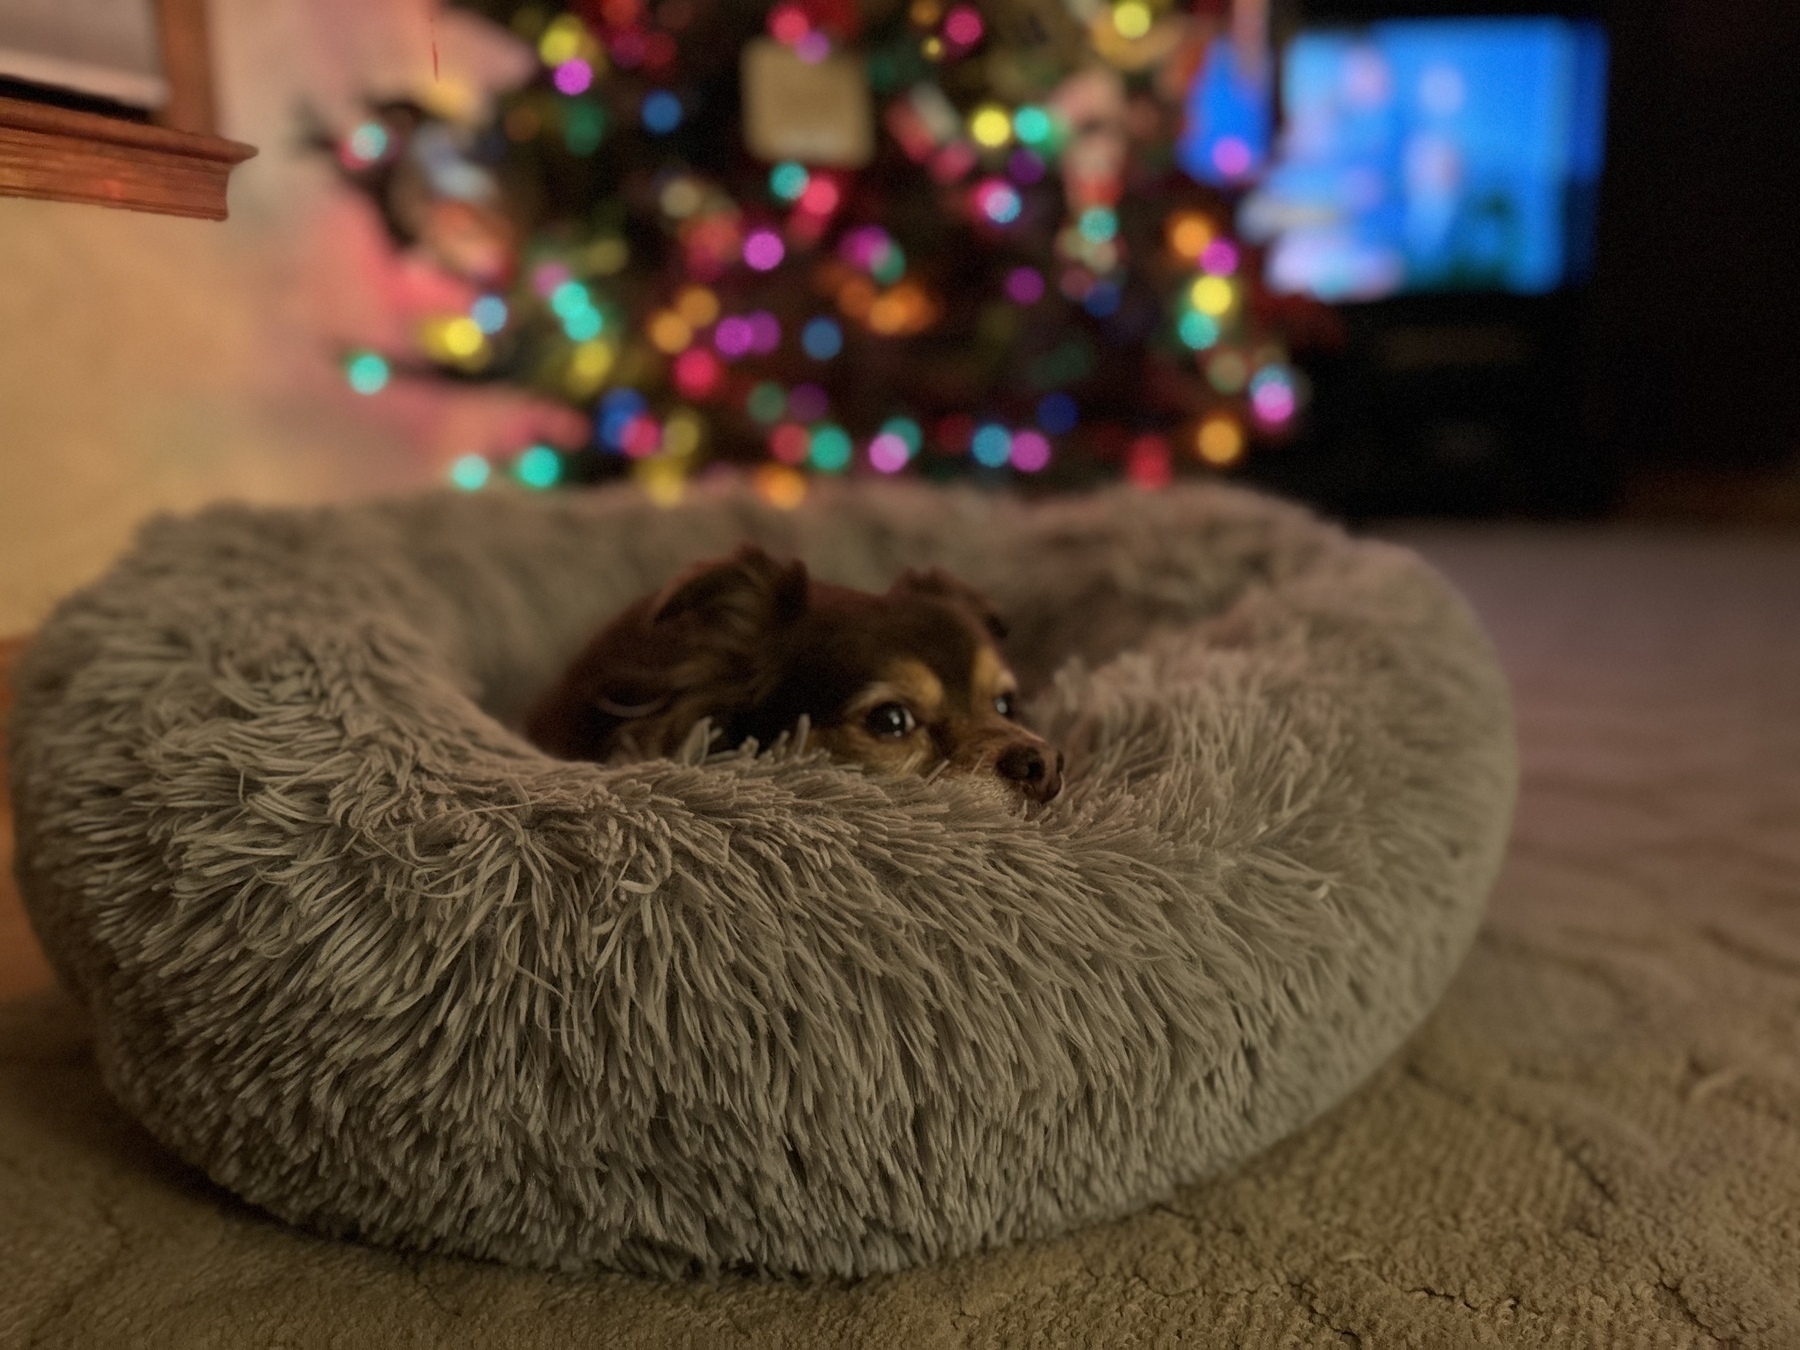 A small brown chihuahua with a gentle expression is resting inside a cozy, fluffy grey dog bed. The bed is placed on a carpeted floor in a warmly lit room with a Christmas tree, glowing with multicolored lights, softly blurred in the background.